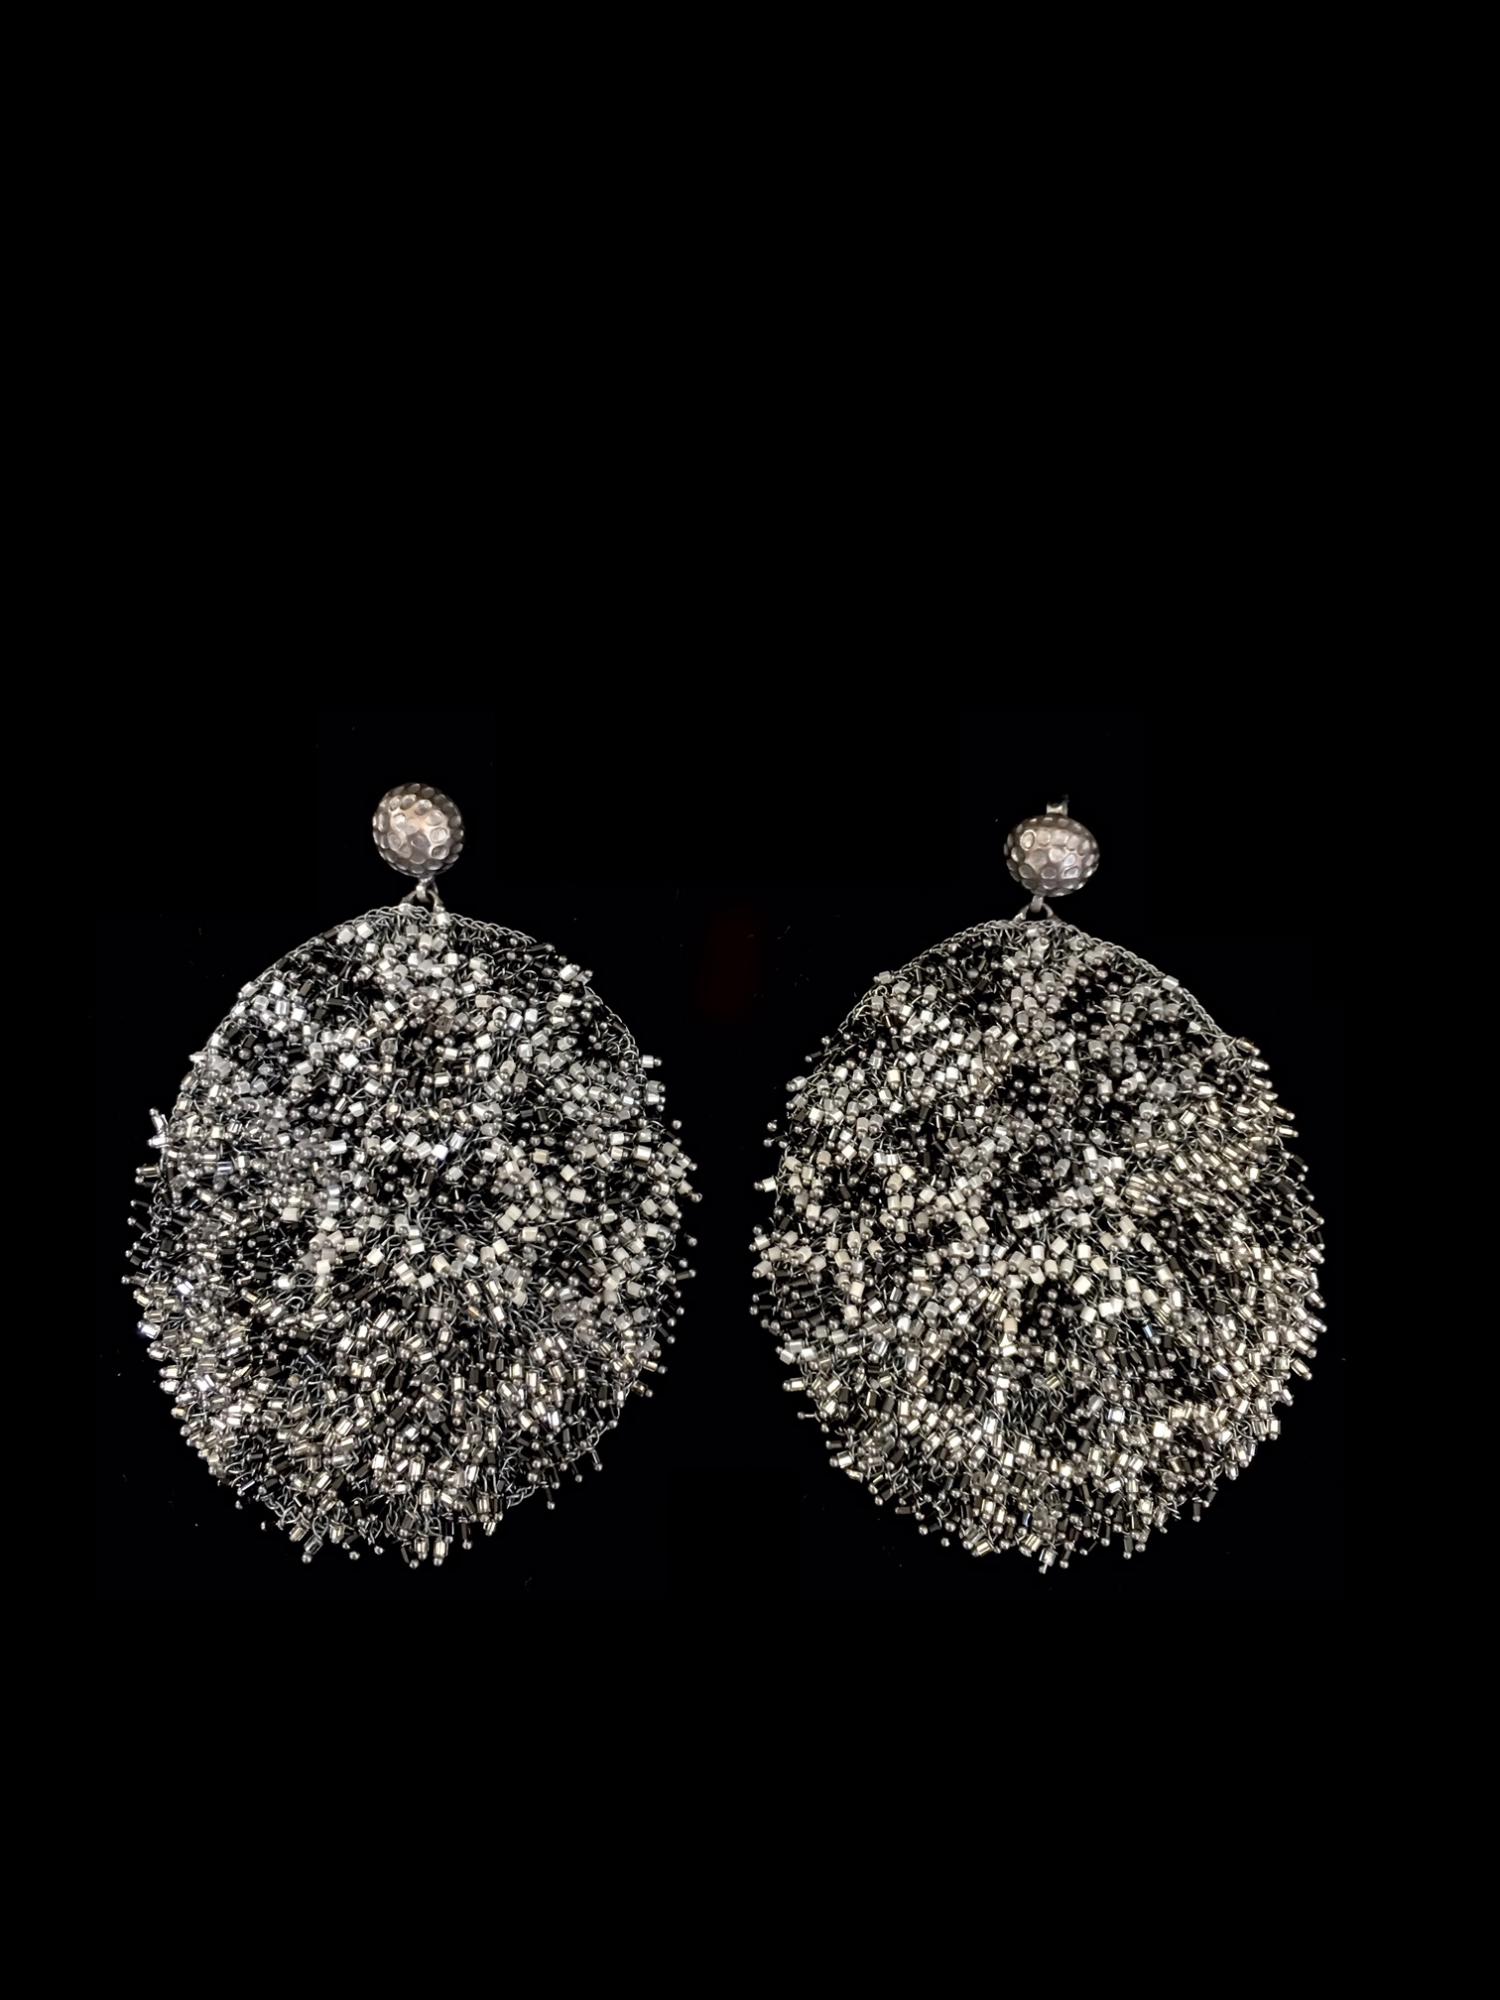 Woven Earrings with Swarovski Crystals (58CTWH)